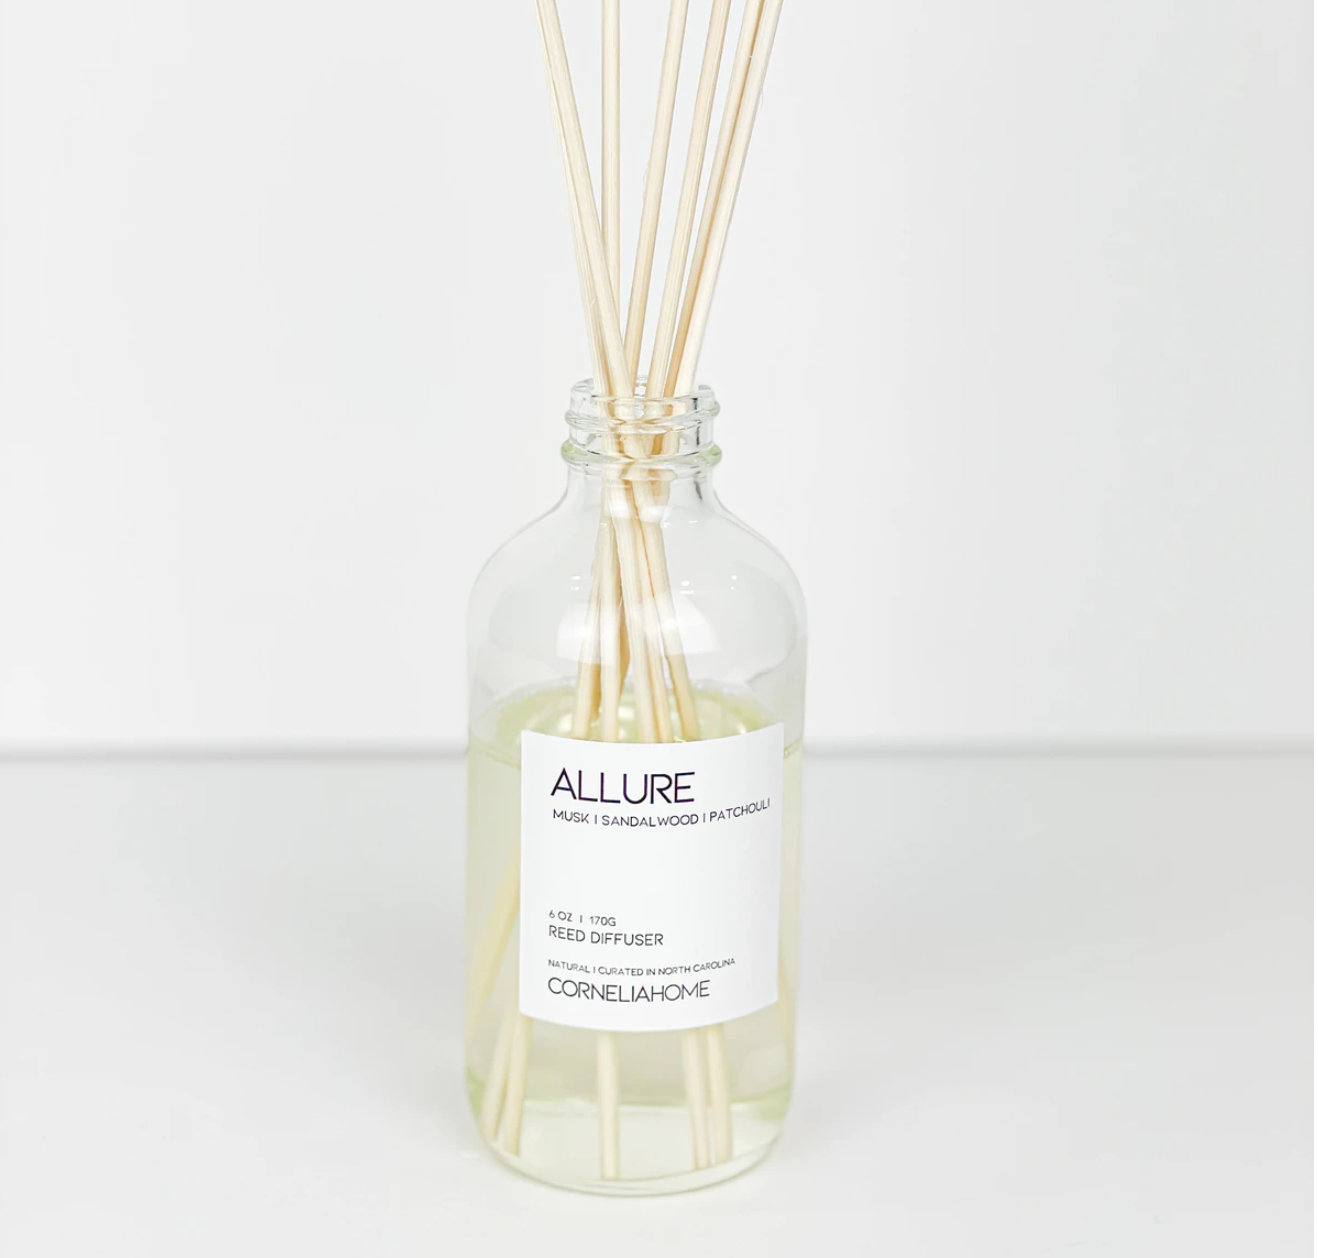 'Allure' Reed Diffuser